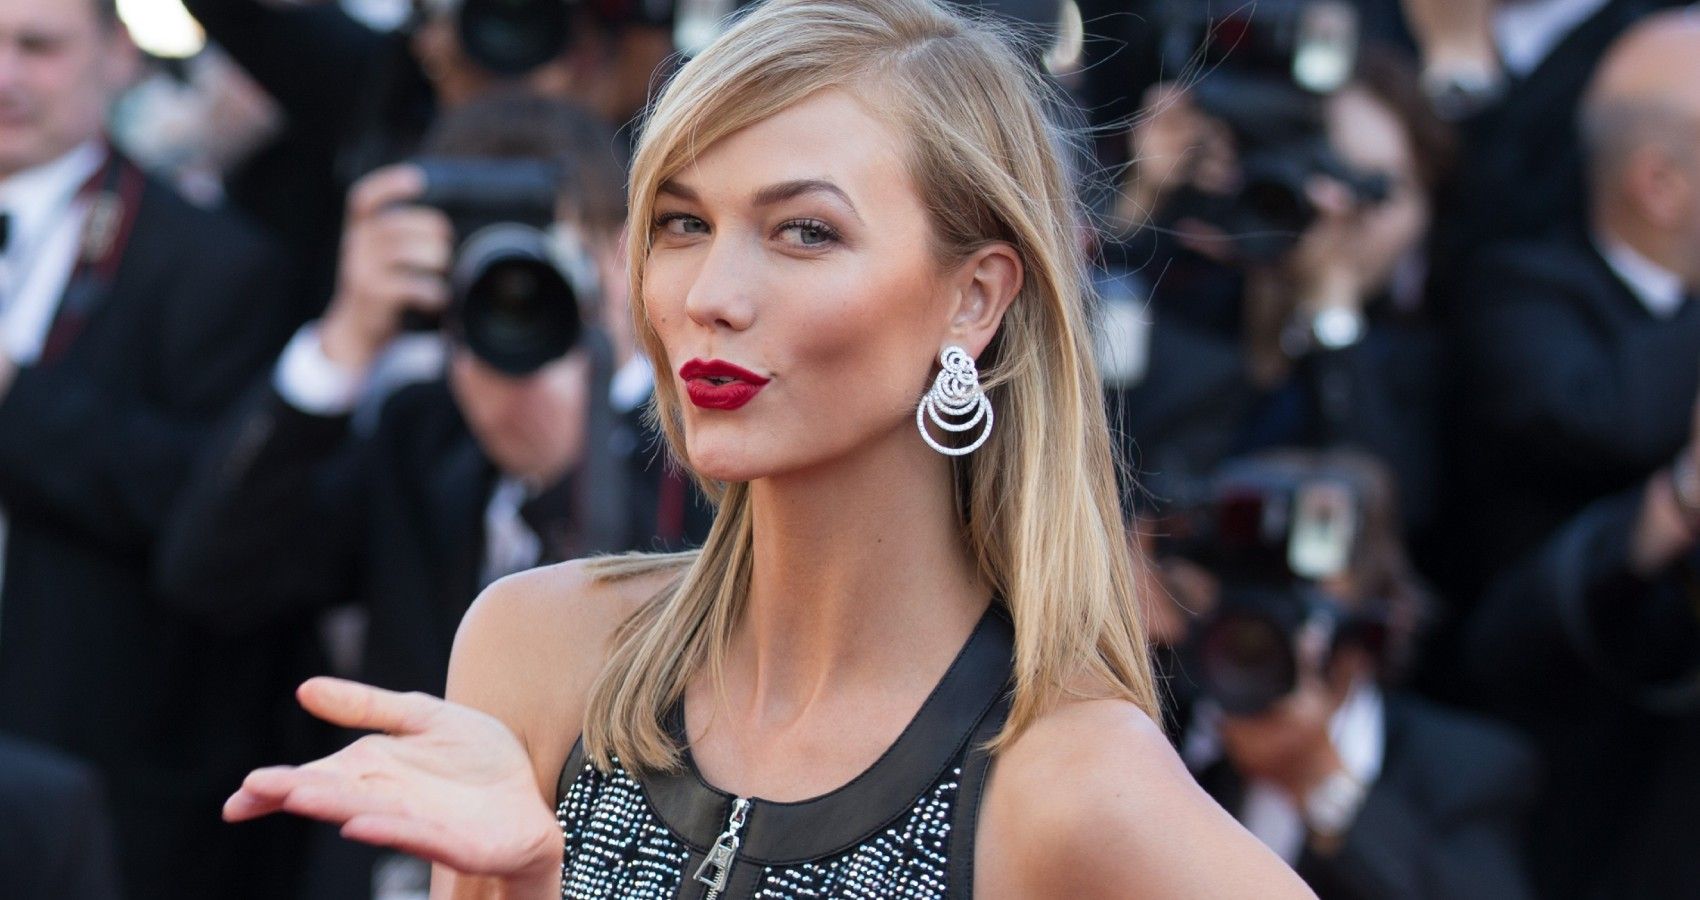 Karlie Kloss Posts Photo Of Her New Baby Boy